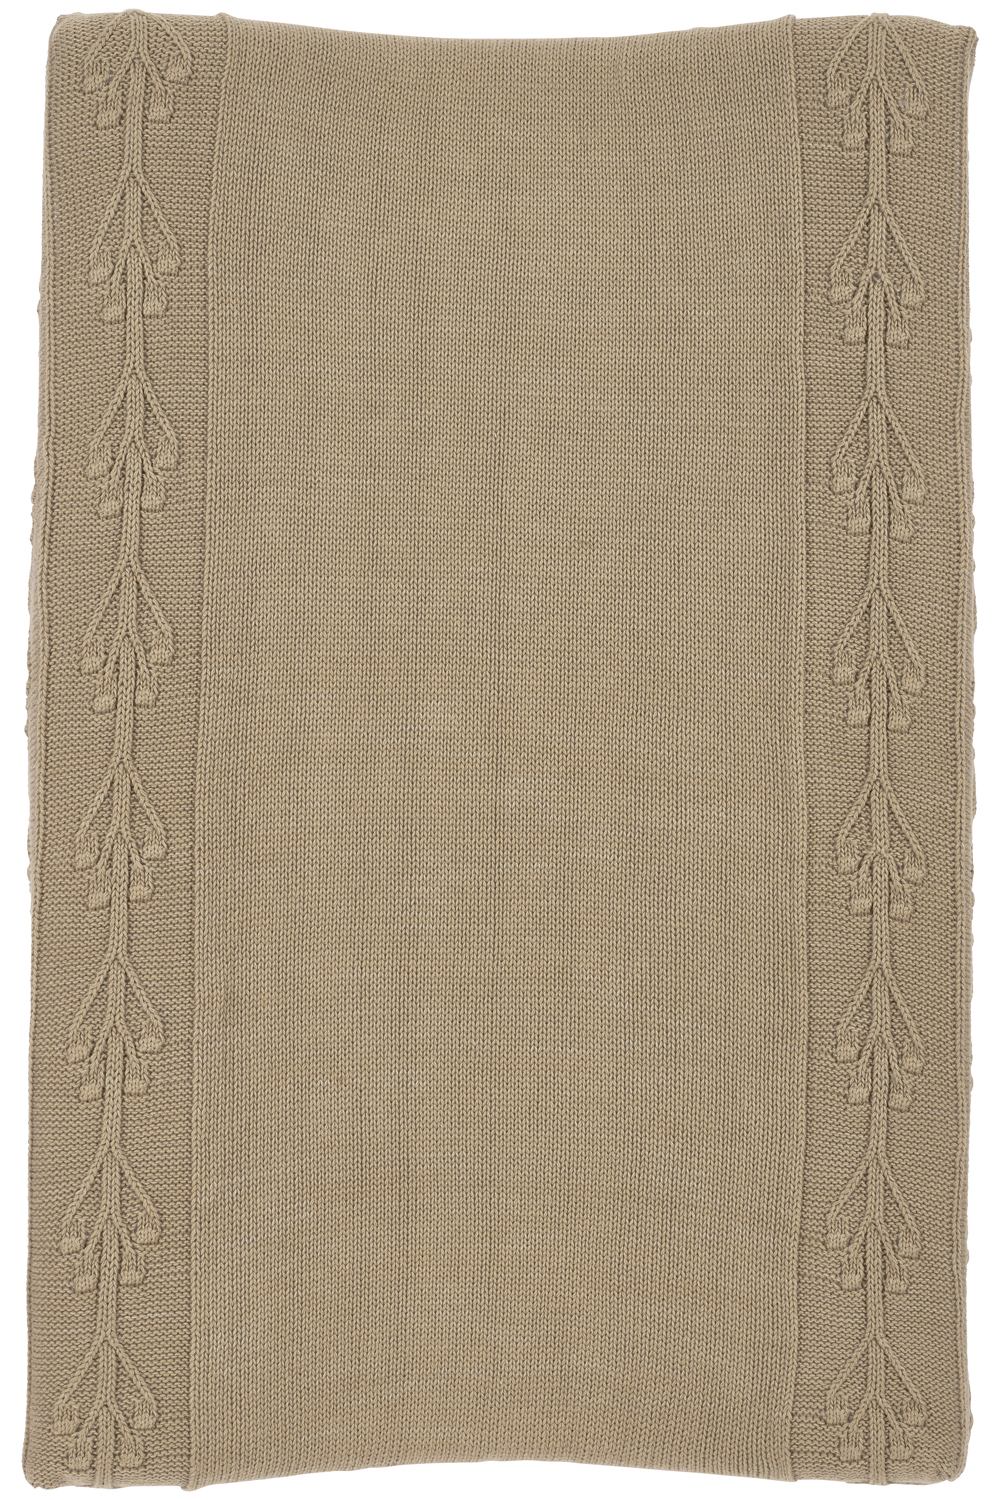 Changing mat cover Romantic Flower - taupe - 50x70cm